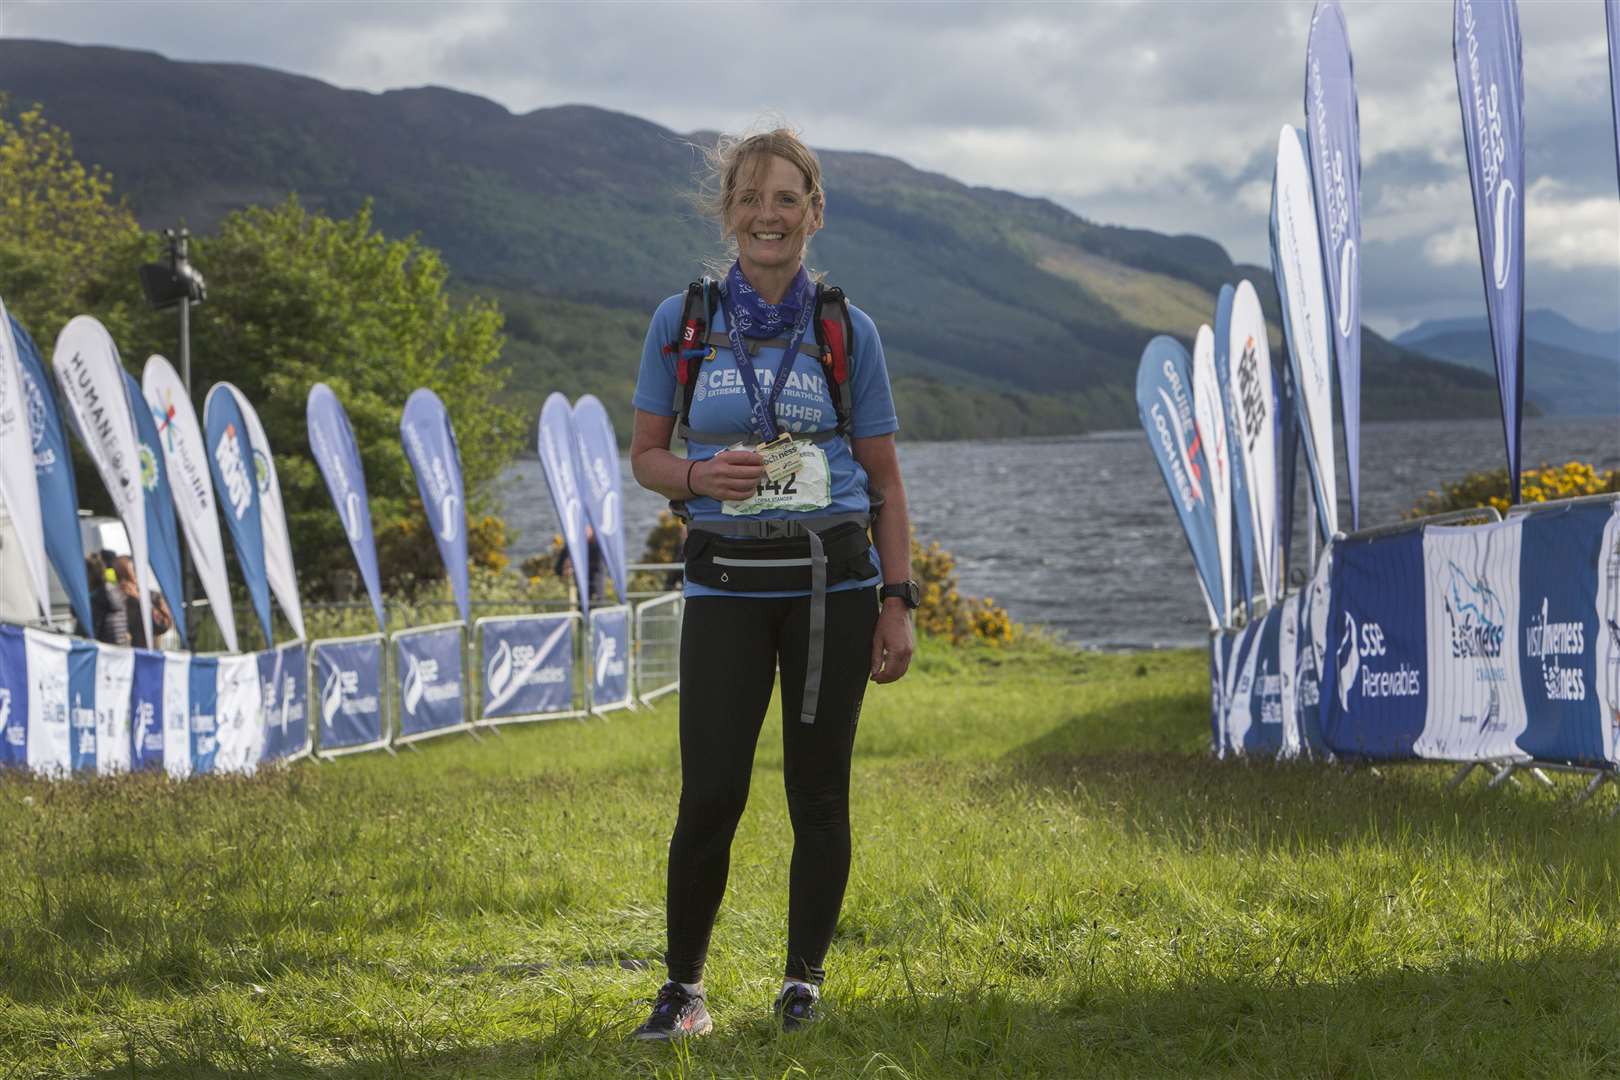 Lorna Stanger shows her third-place female medal at the finishing line of the Loch Ness Ultra Marathon Challenge. Picture: Robert MacDonald / Northern Studios